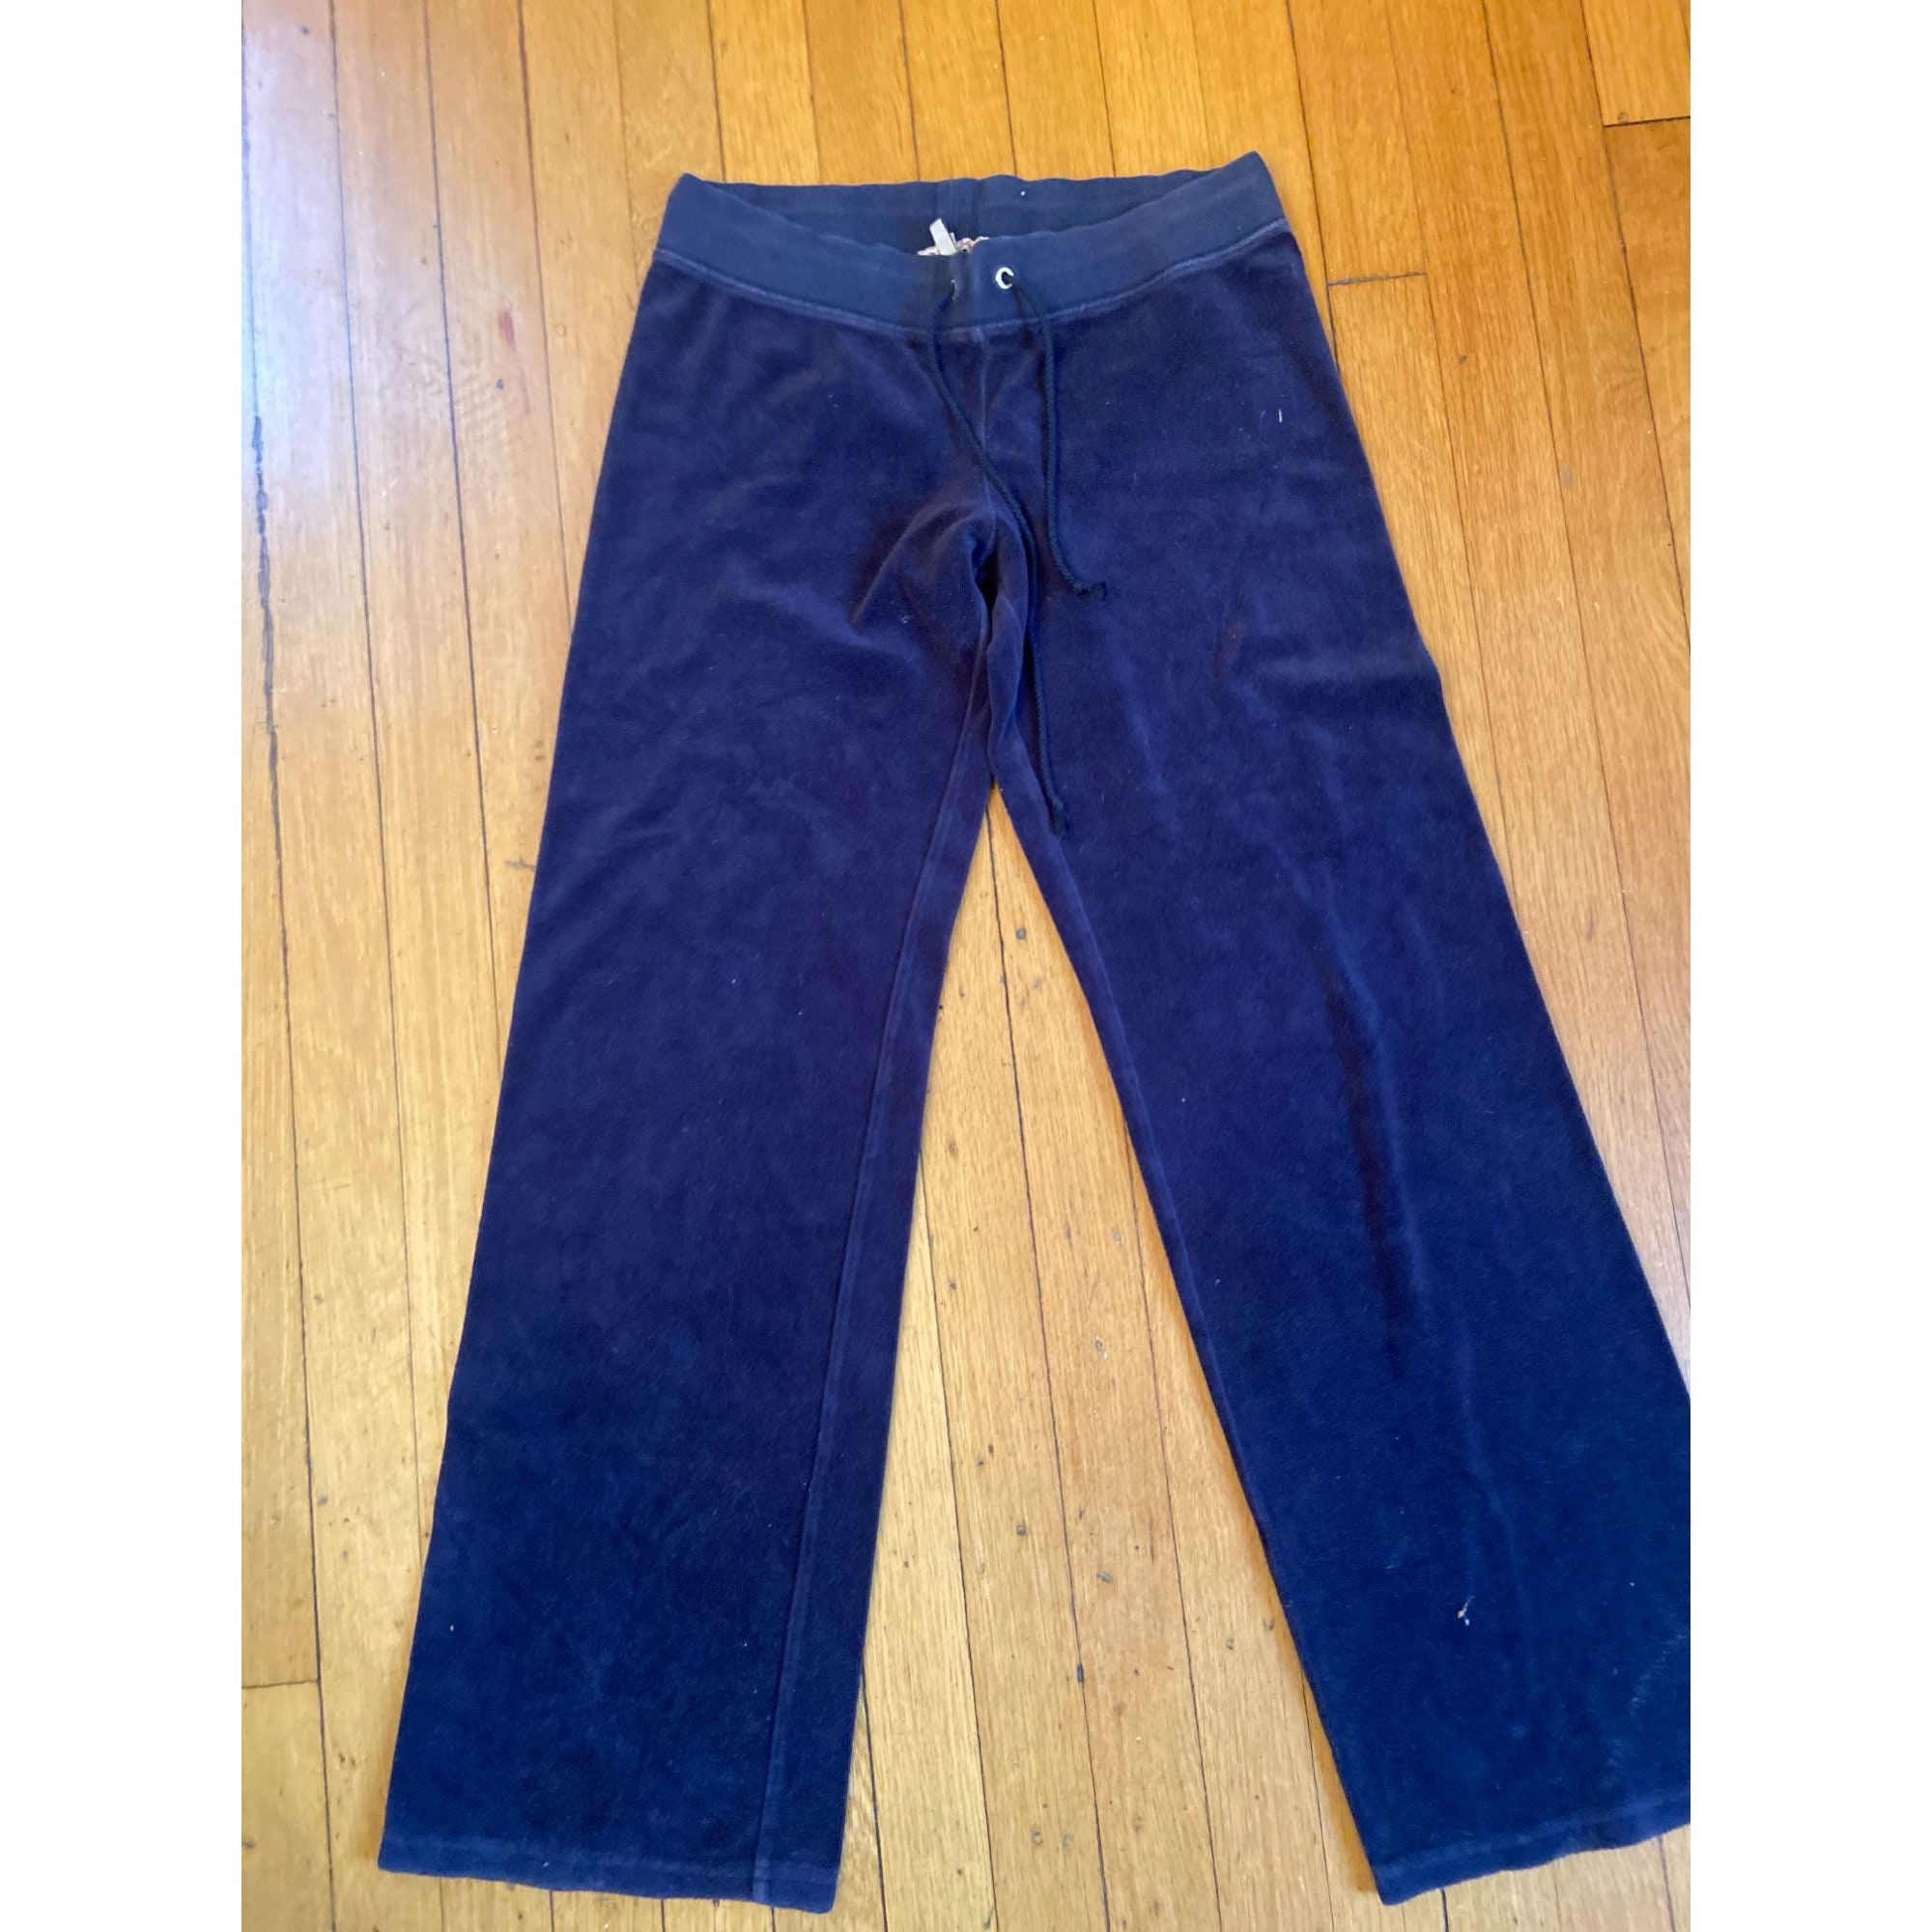 Juicy Couture Kids blue Velour Bootcut Sweatpants (7-16 Years